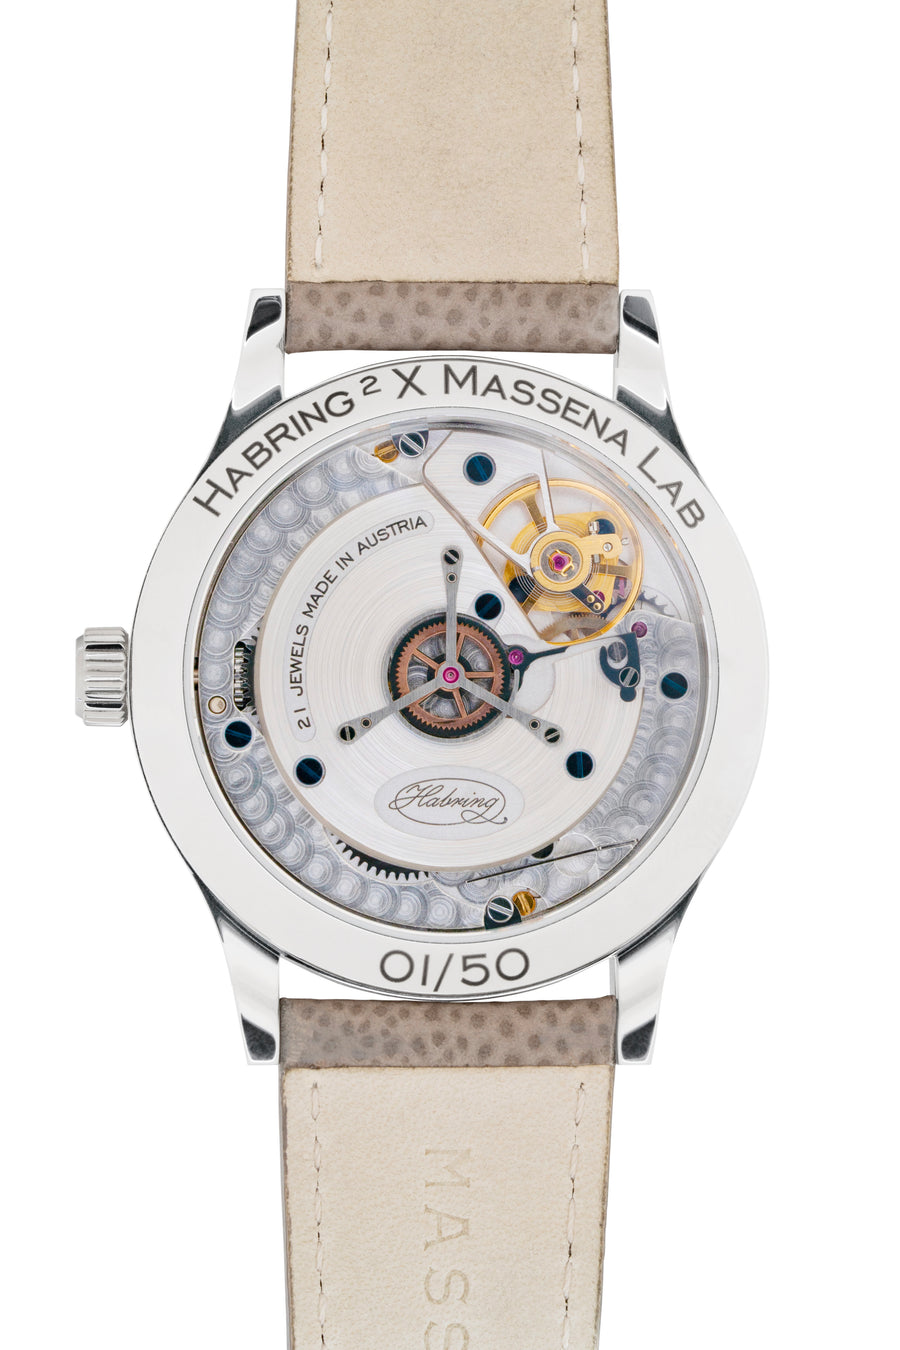 The Massena LAB x Habring² ERWIN LAB02 is powered by the Habring² caliber A11MS hand-wound movement.